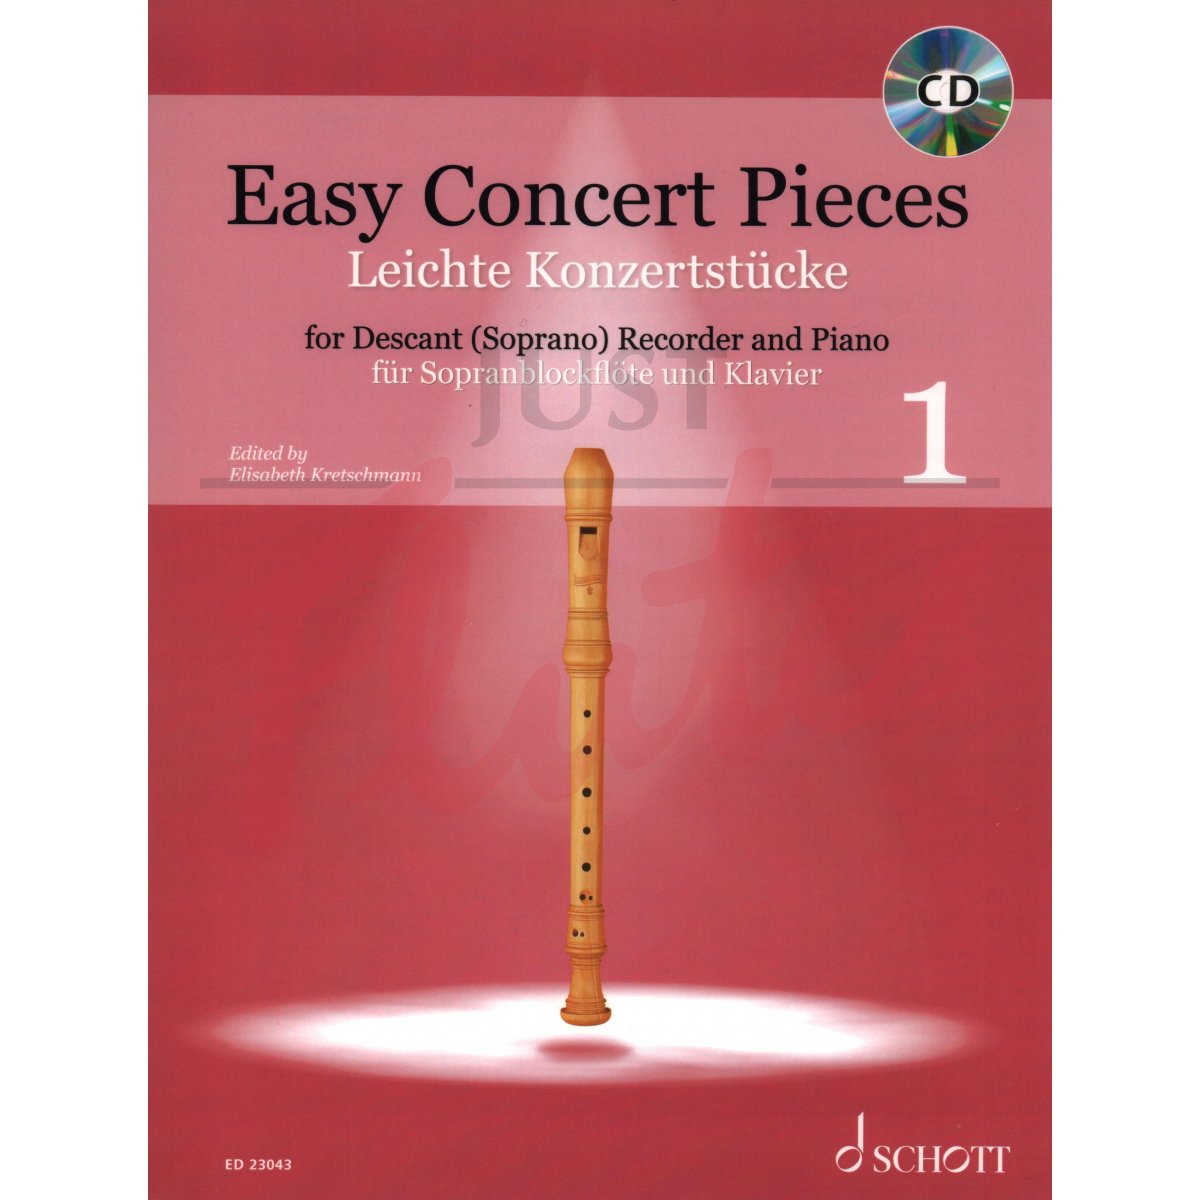 Easy Concert Pieces for Descant Recorder and Piano